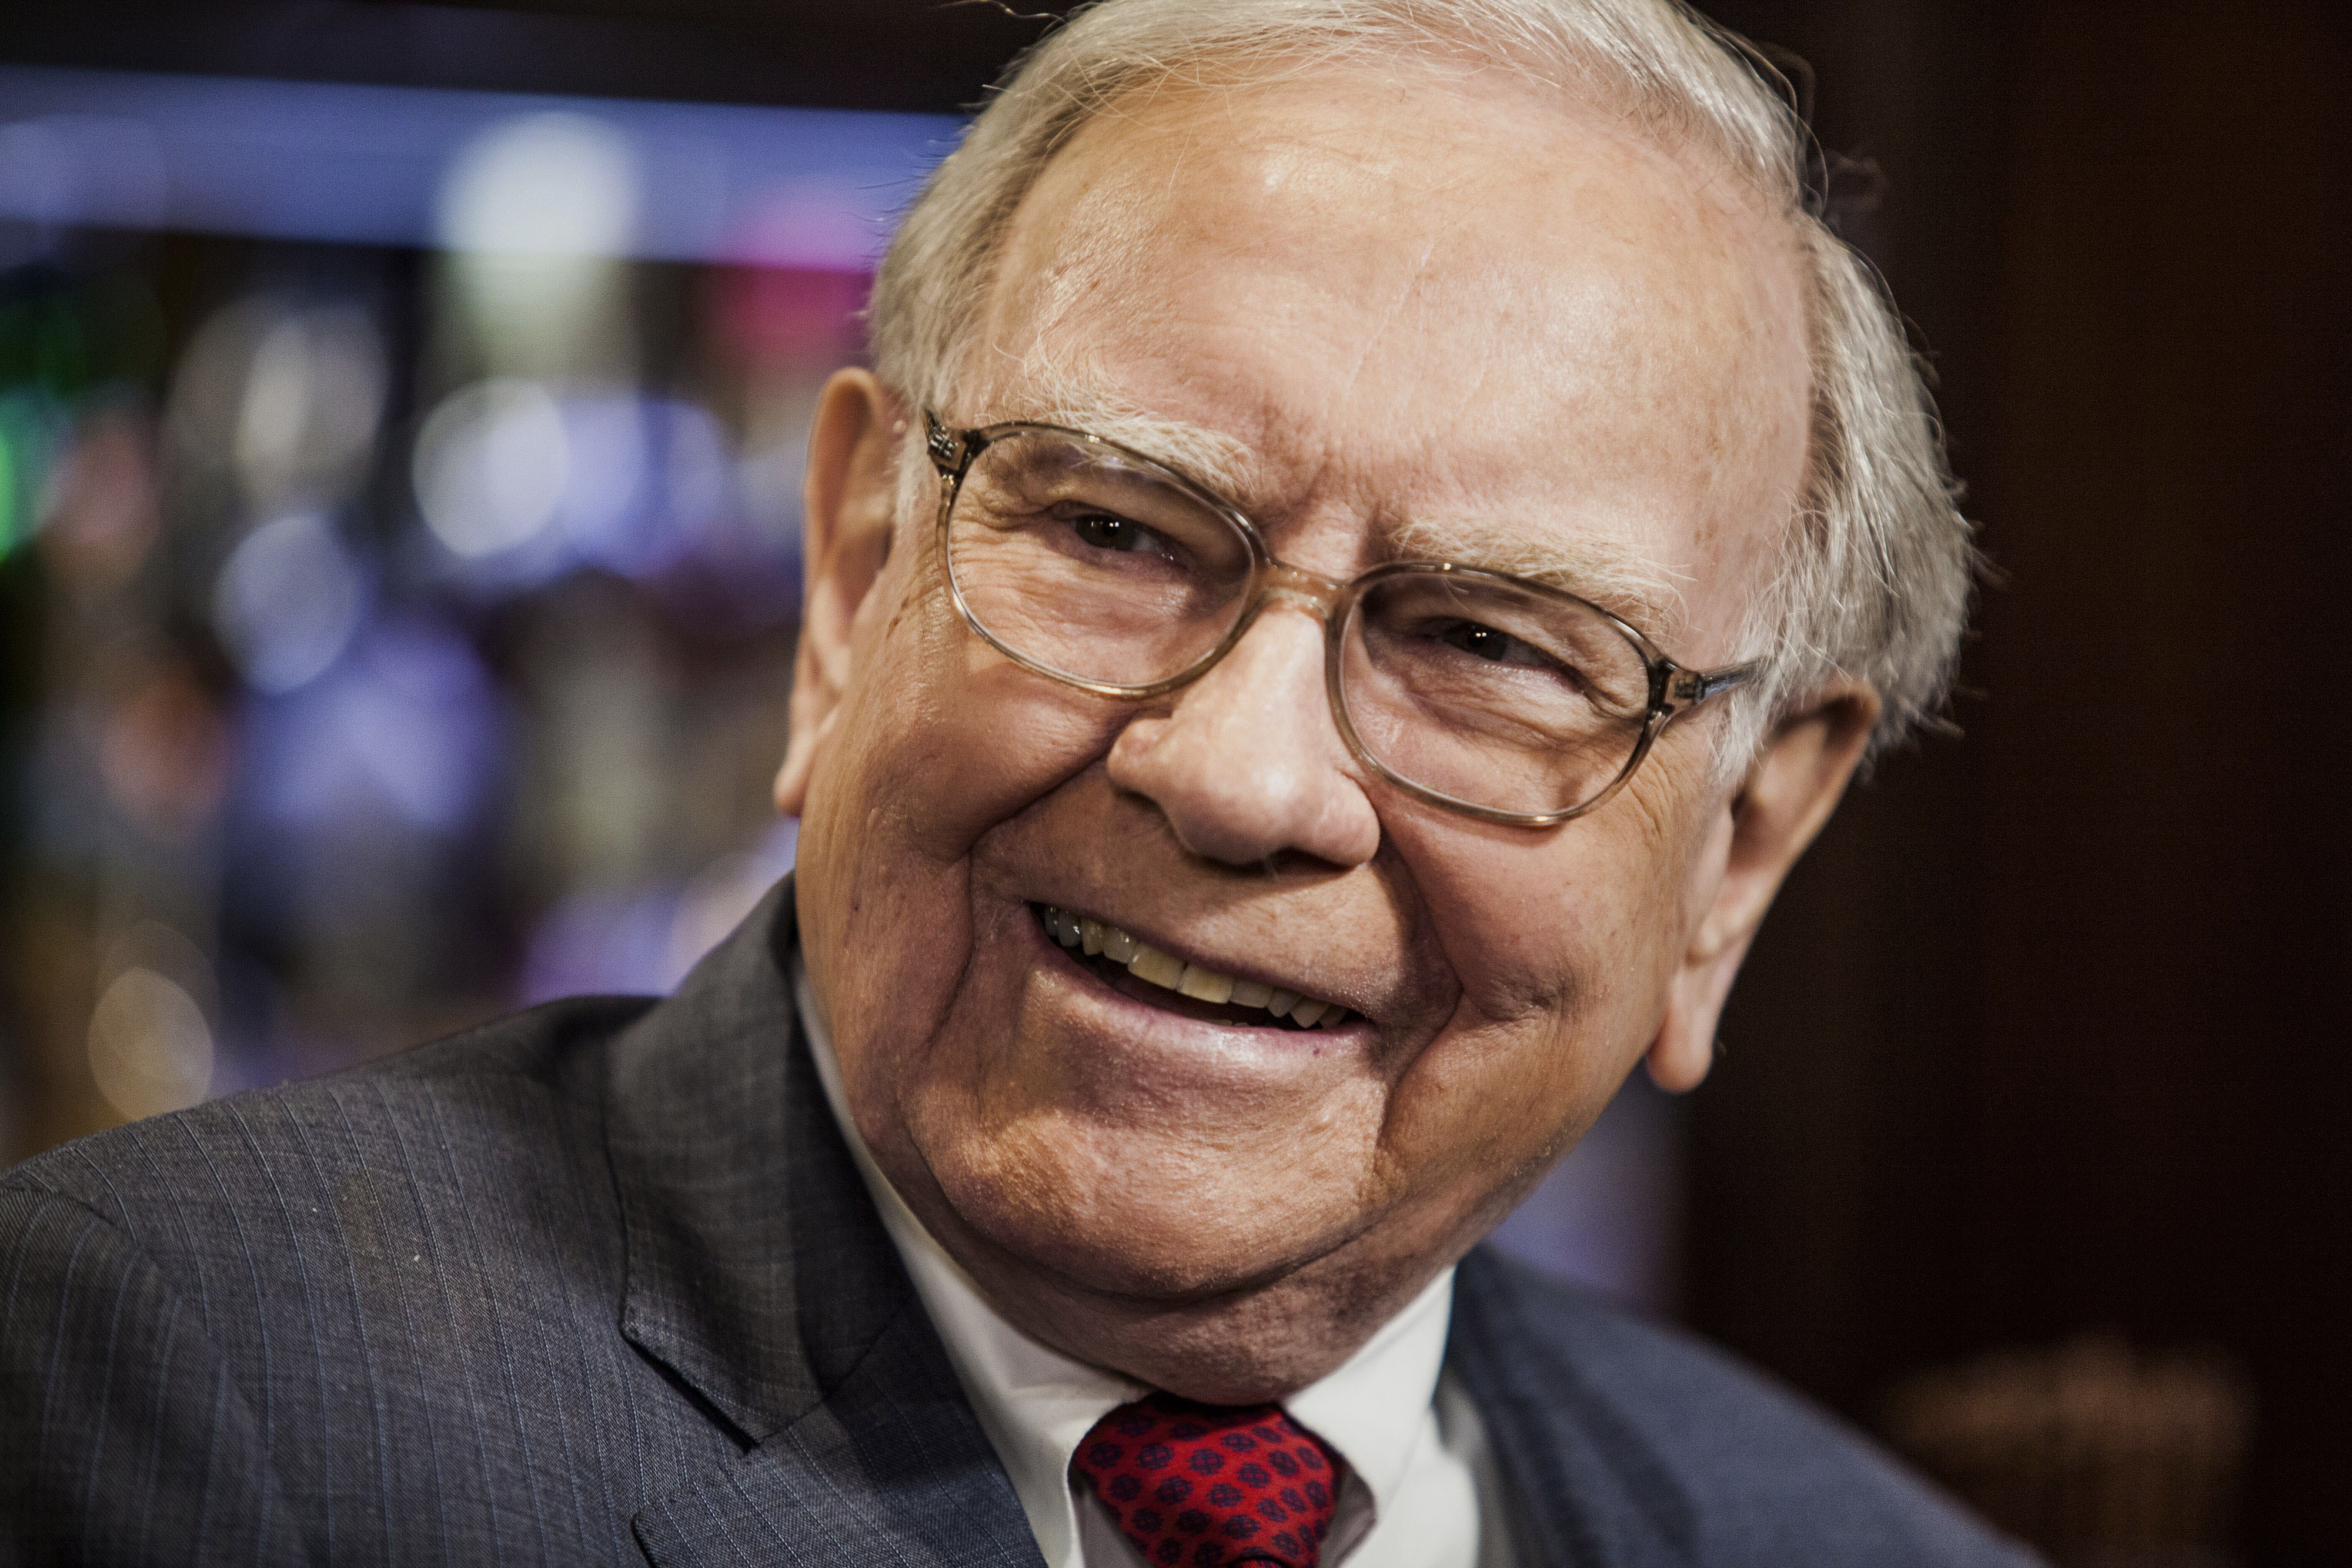 Berkshire Hathaway CEO Warren Buffett is giving away $2.8 billion as part of his annual donation pledge. (Bloomberg&mdash;Bloomberg via Getty Images)